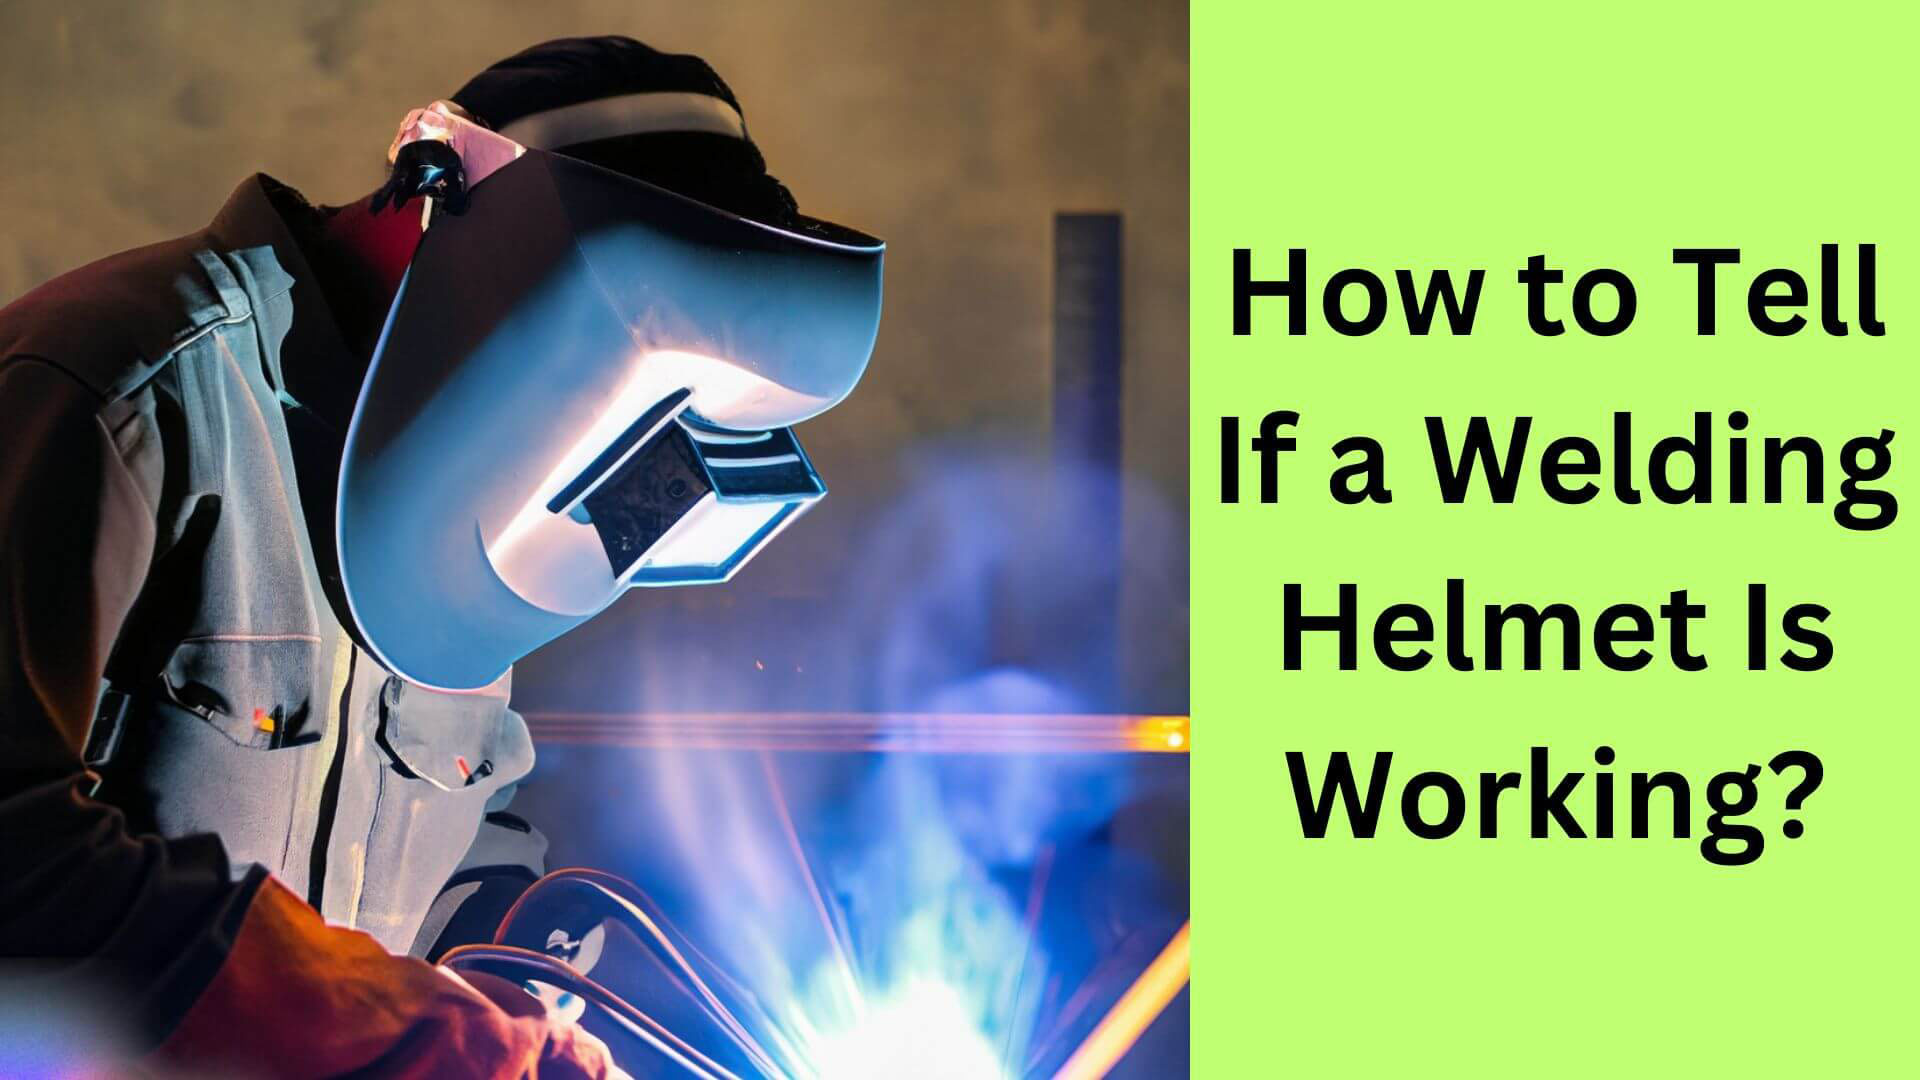 How to Tell If a Welding Helmet Is Working?